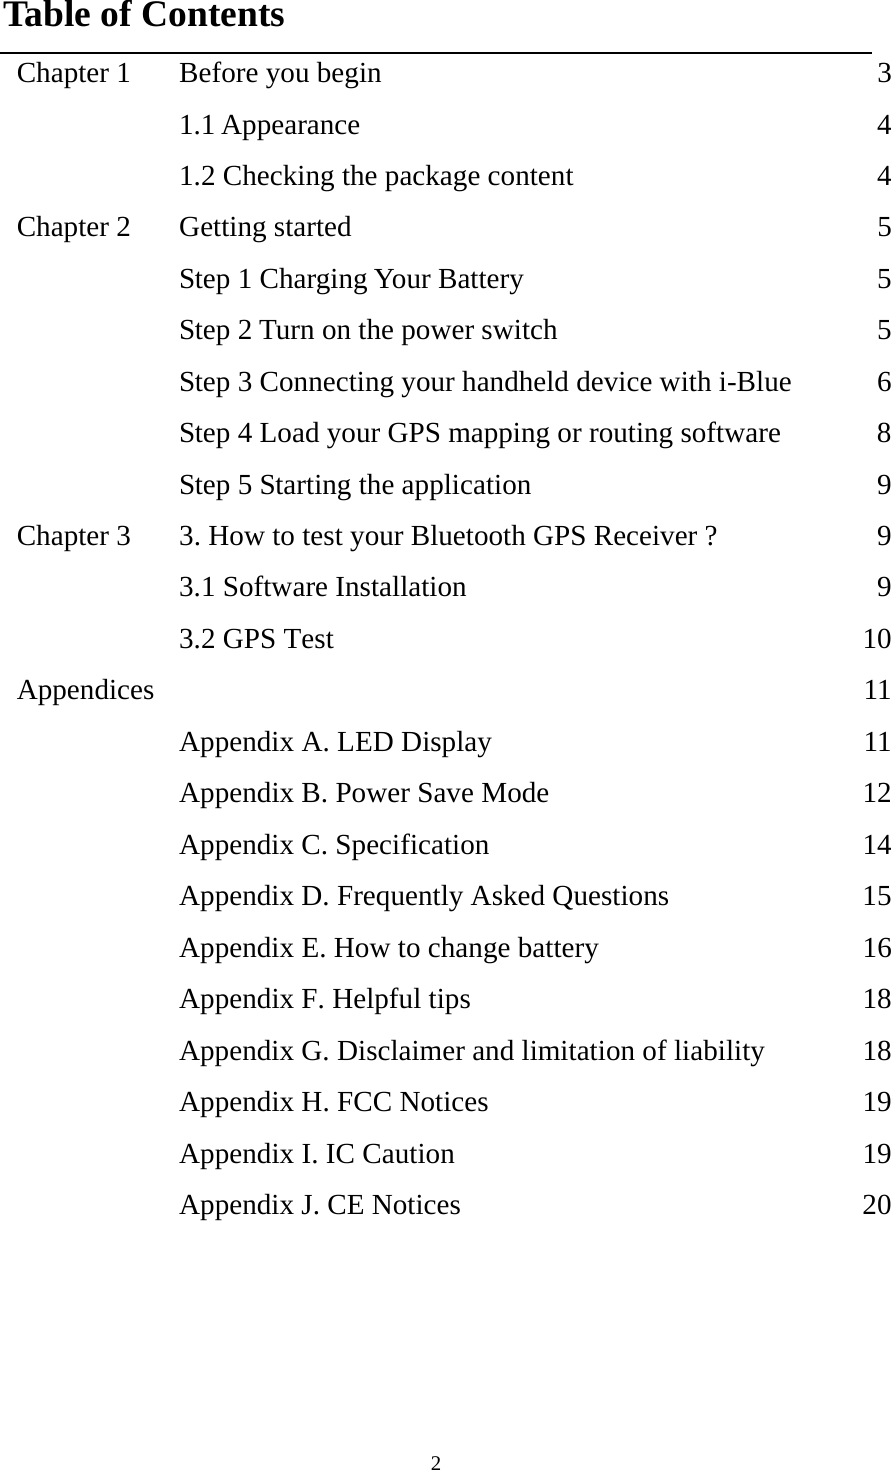  2Table of Contents Chapter 1  Before you begin  3 1.1 Appearance  4  1.2 Checking the package content  4Chapter 2  Getting started  5  Step 1 Charging Your Battery  5  Step 2 Turn on the power switch  5  Step 3 Connecting your handheld device with i-Blue  6  Step 4 Load your GPS mapping or routing software  8  Step 5 Starting the application  9Chapter 3  3. How to test your Bluetooth GPS Receiver ?  9  3.1 Software Installation  9  3.2 GPS Test  10Appendices   11  Appendix A. LED Display  11  Appendix B. Power Save Mode  12  Appendix C. Specification  14  Appendix D. Frequently Asked Questions  15  Appendix E. How to change battery  16  Appendix F. Helpful tips  18  Appendix G. Disclaimer and limitation of liability  18  Appendix H. FCC Notices  19  Appendix I. IC Caution  19  Appendix J. CE Notices  20 